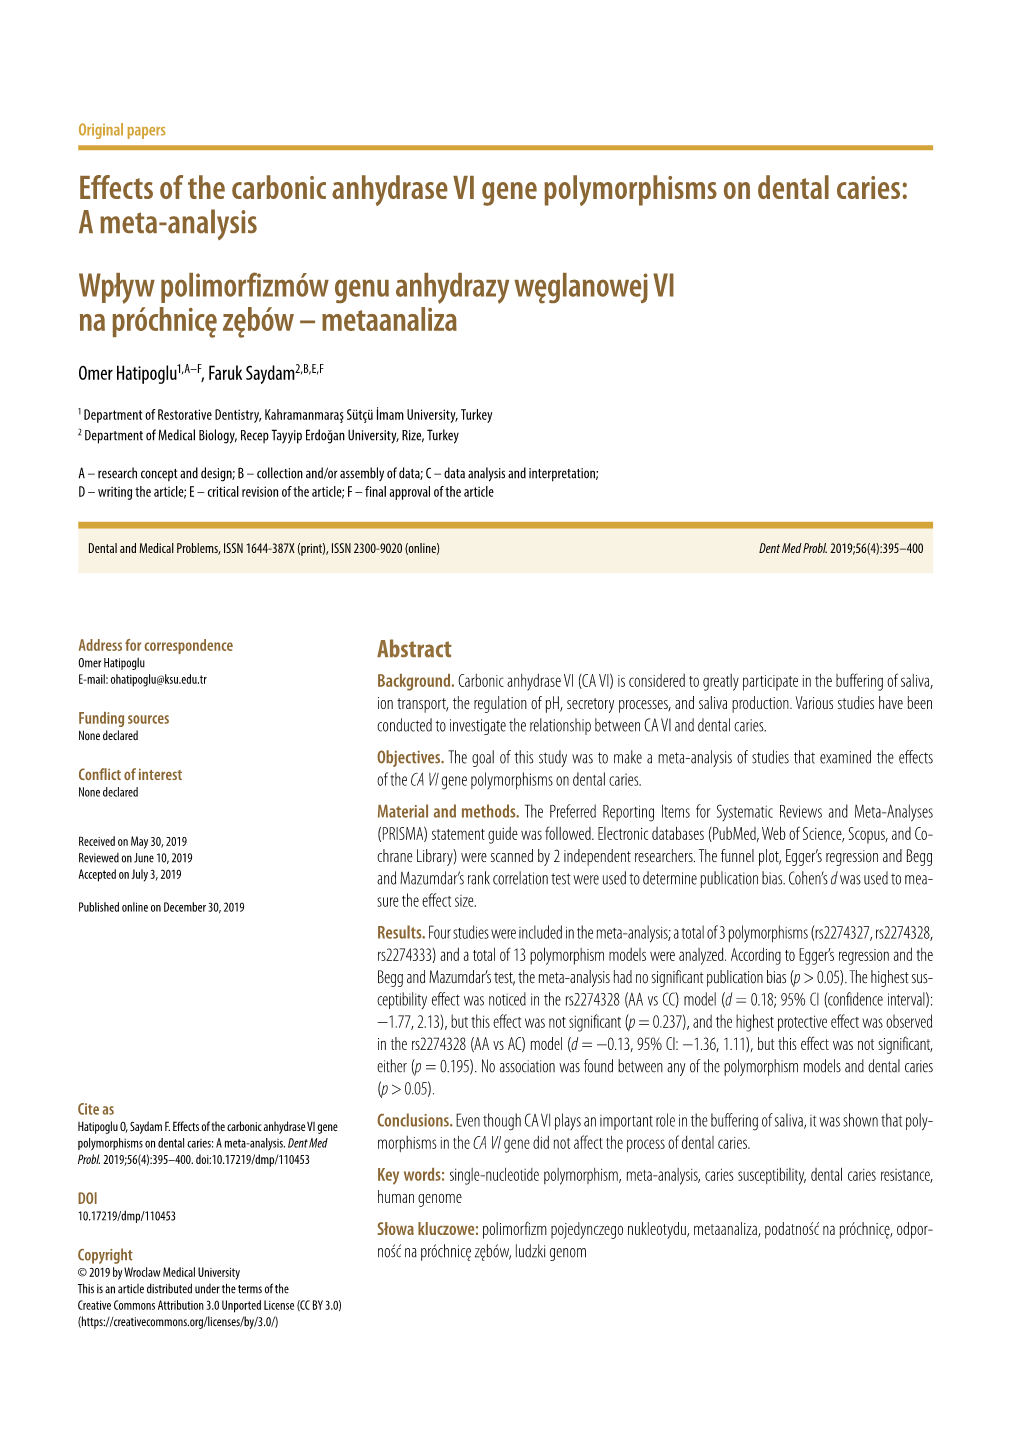 Effects of the Carbonic Anhydrase VI Gene Polymorphisms on Dental Caries